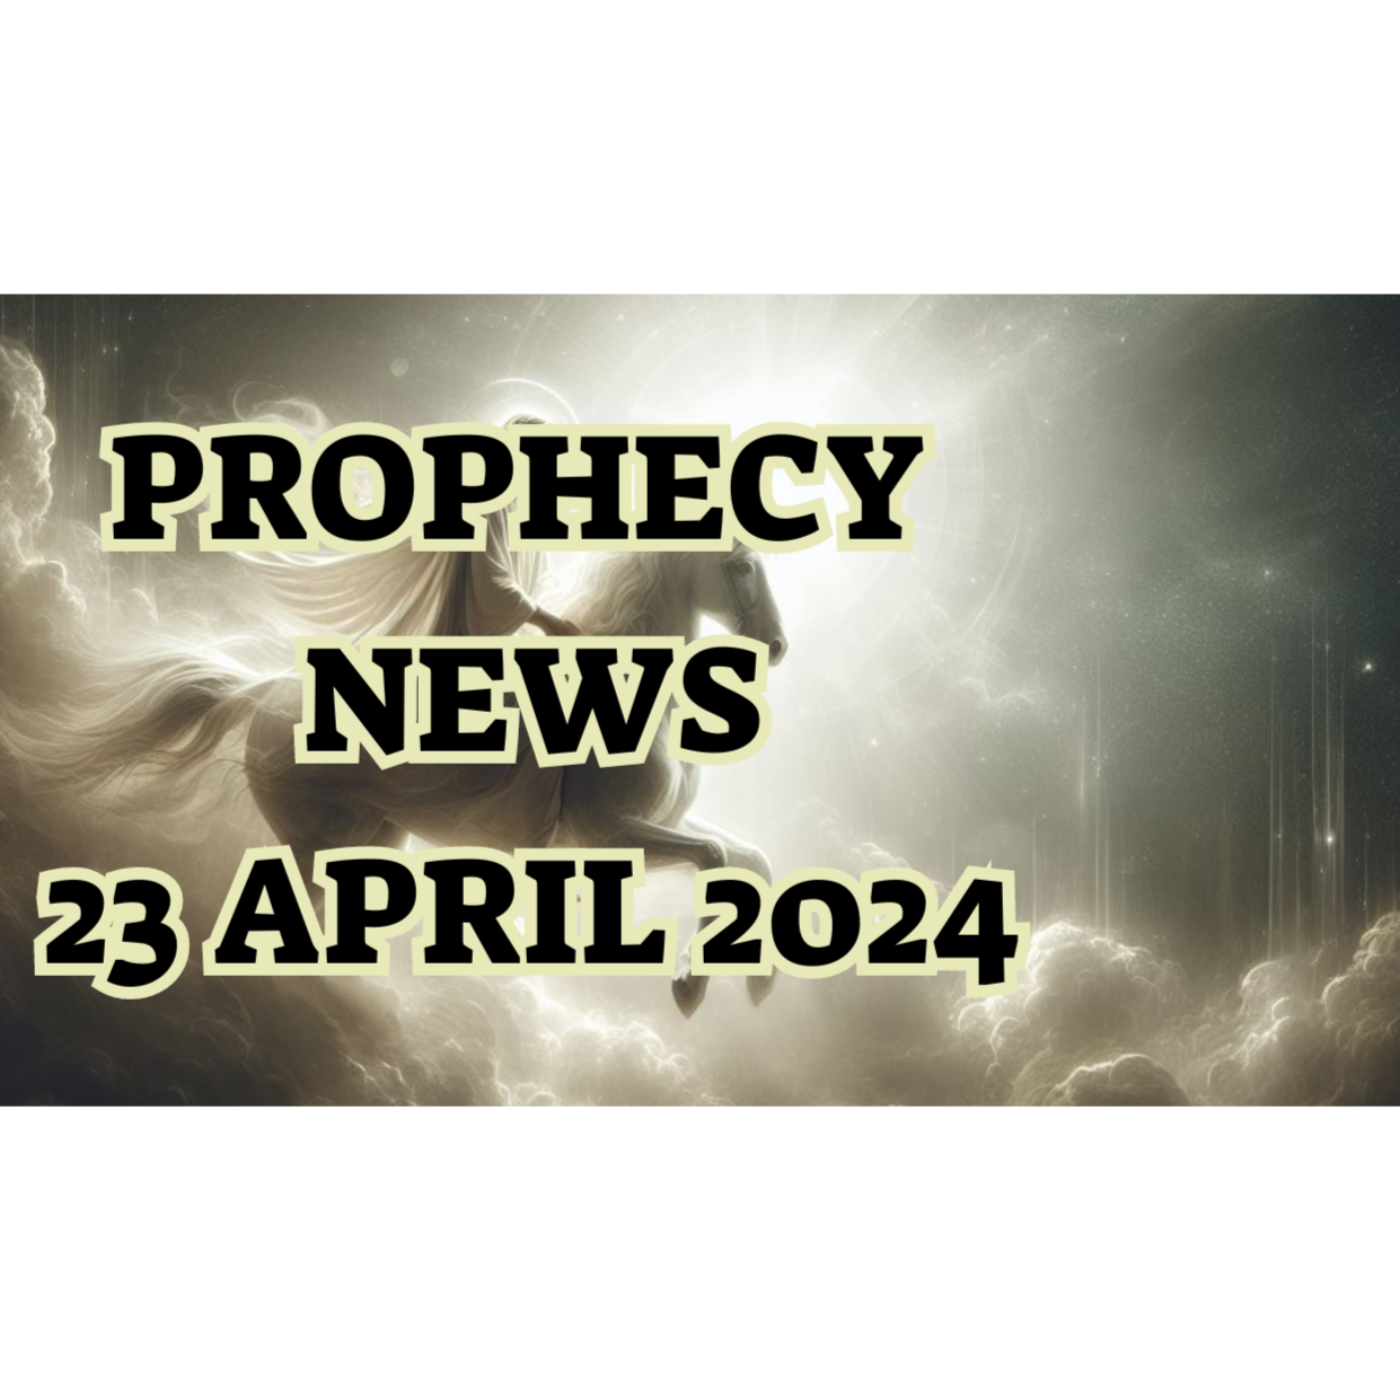 Prophecy News 23.4.24 - Before and After The Passover